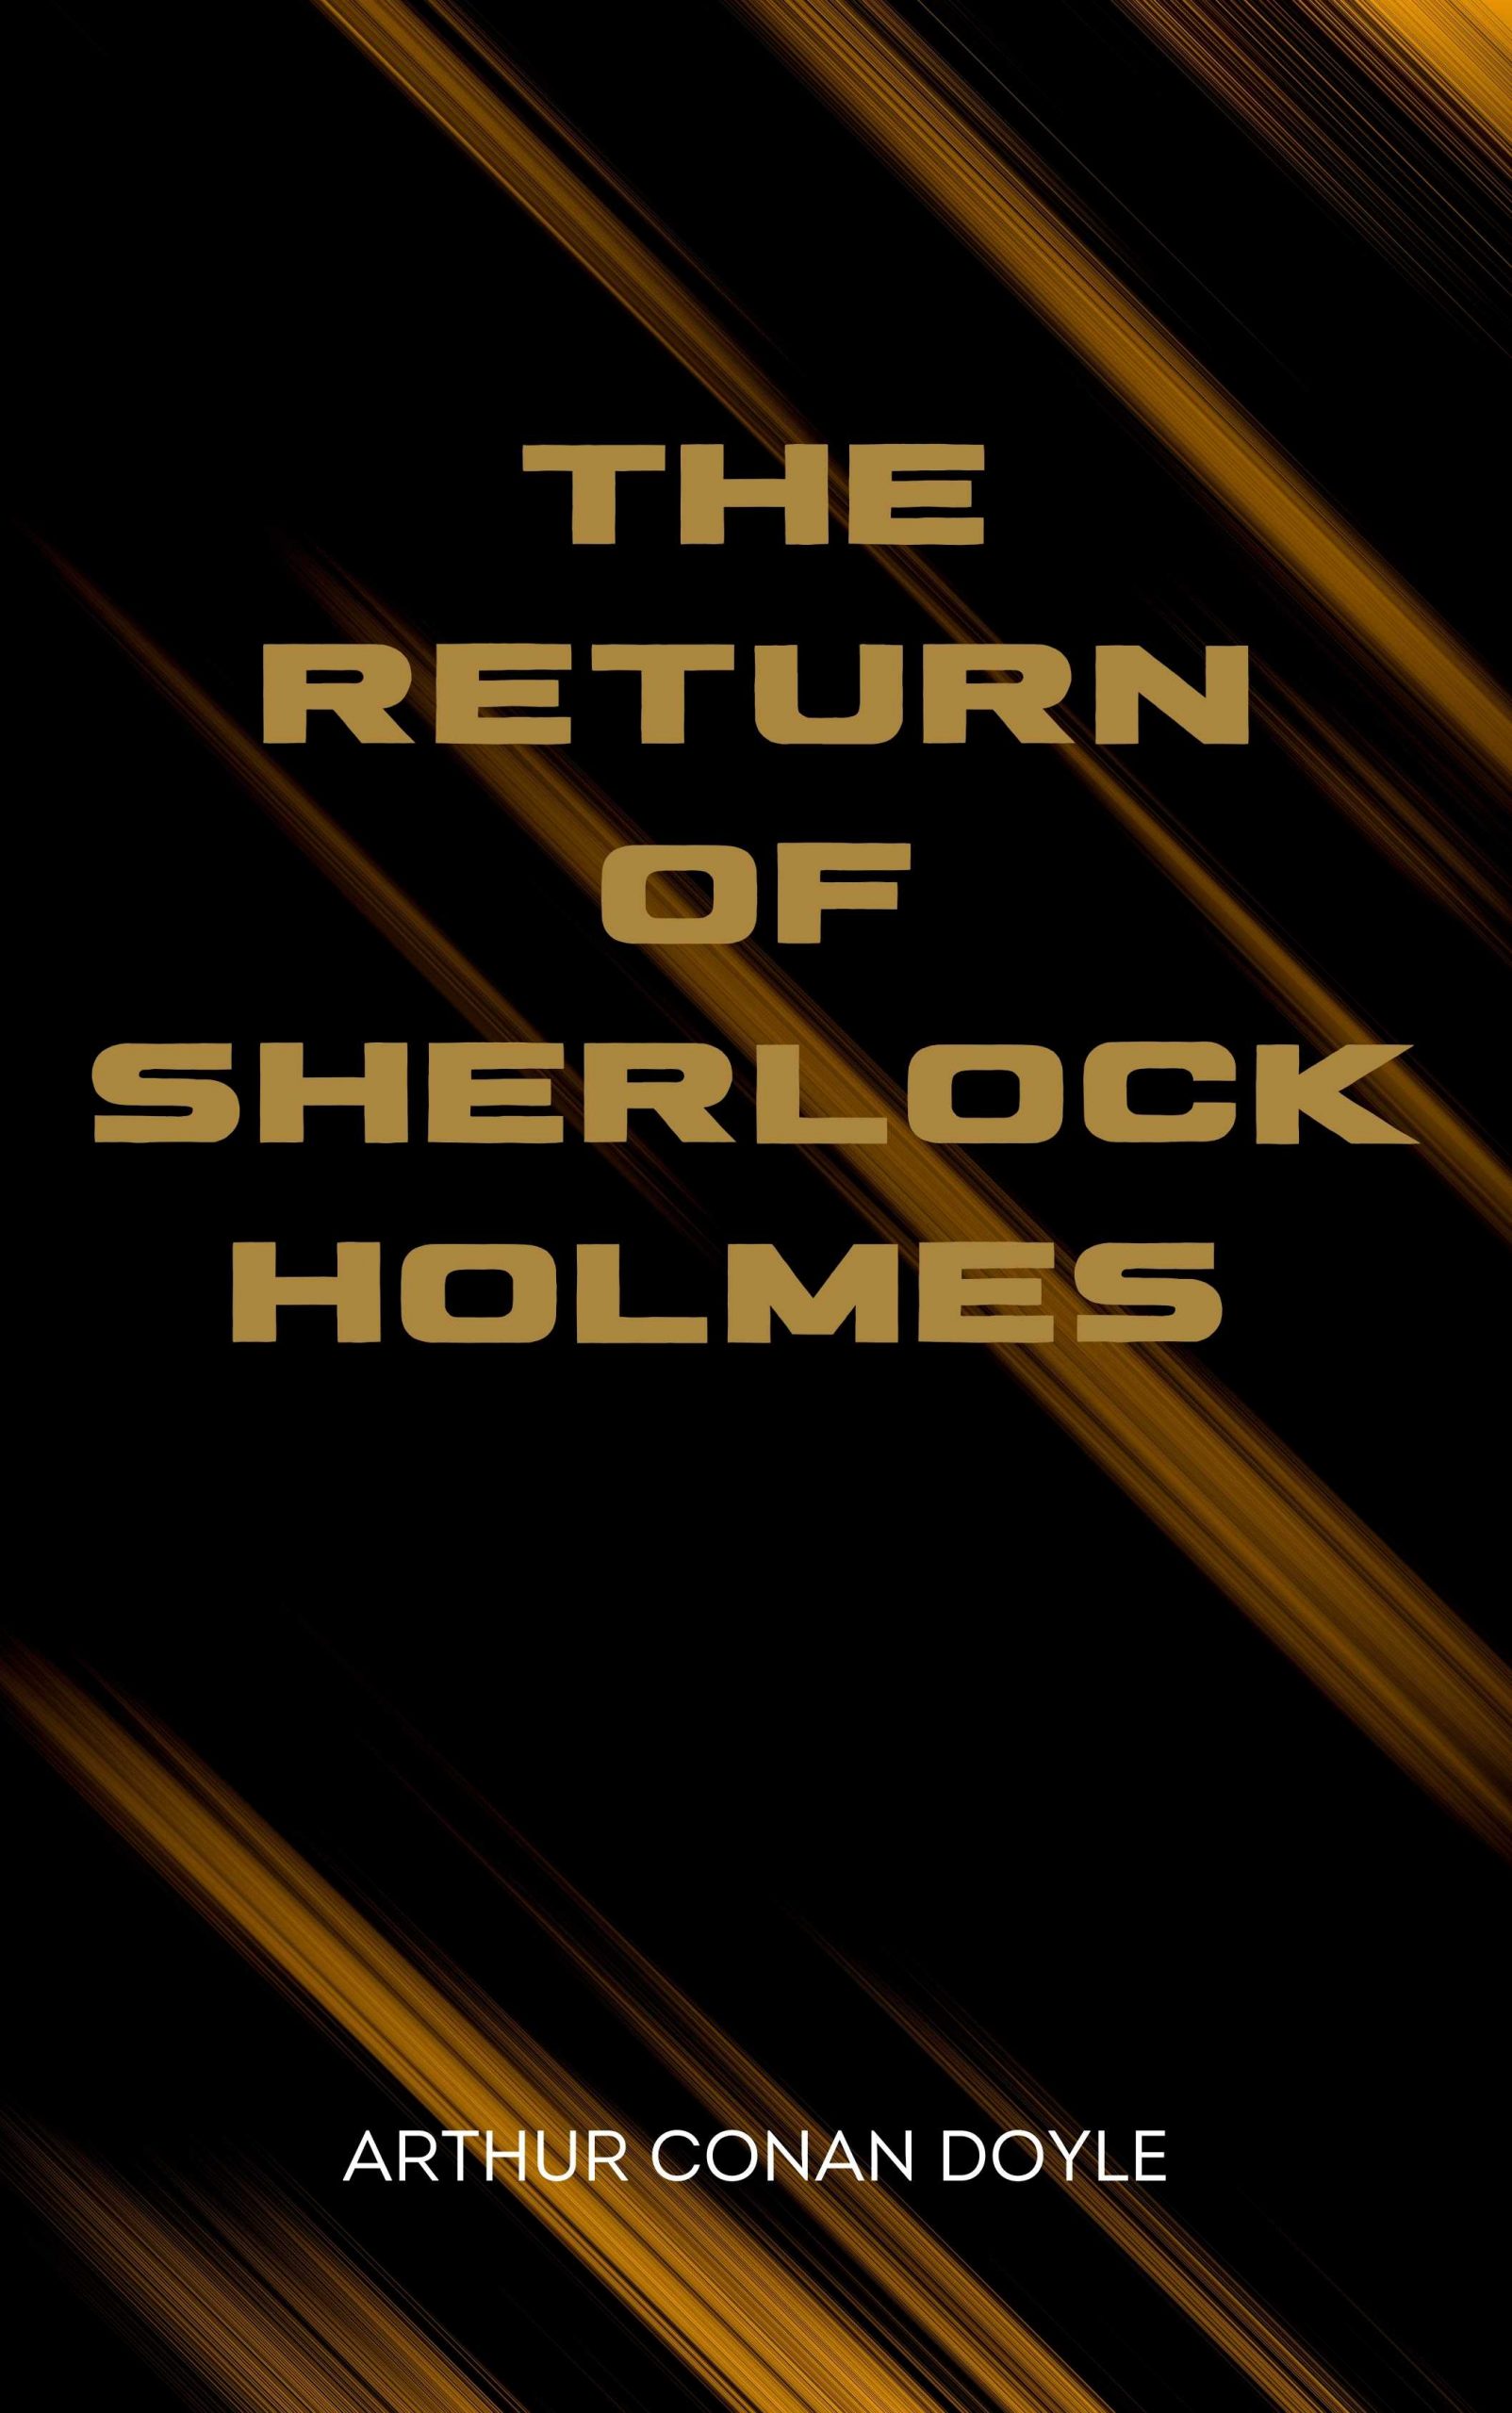 Cover image for The Return of Sherlock Holmes by Arthur Conan Doyle